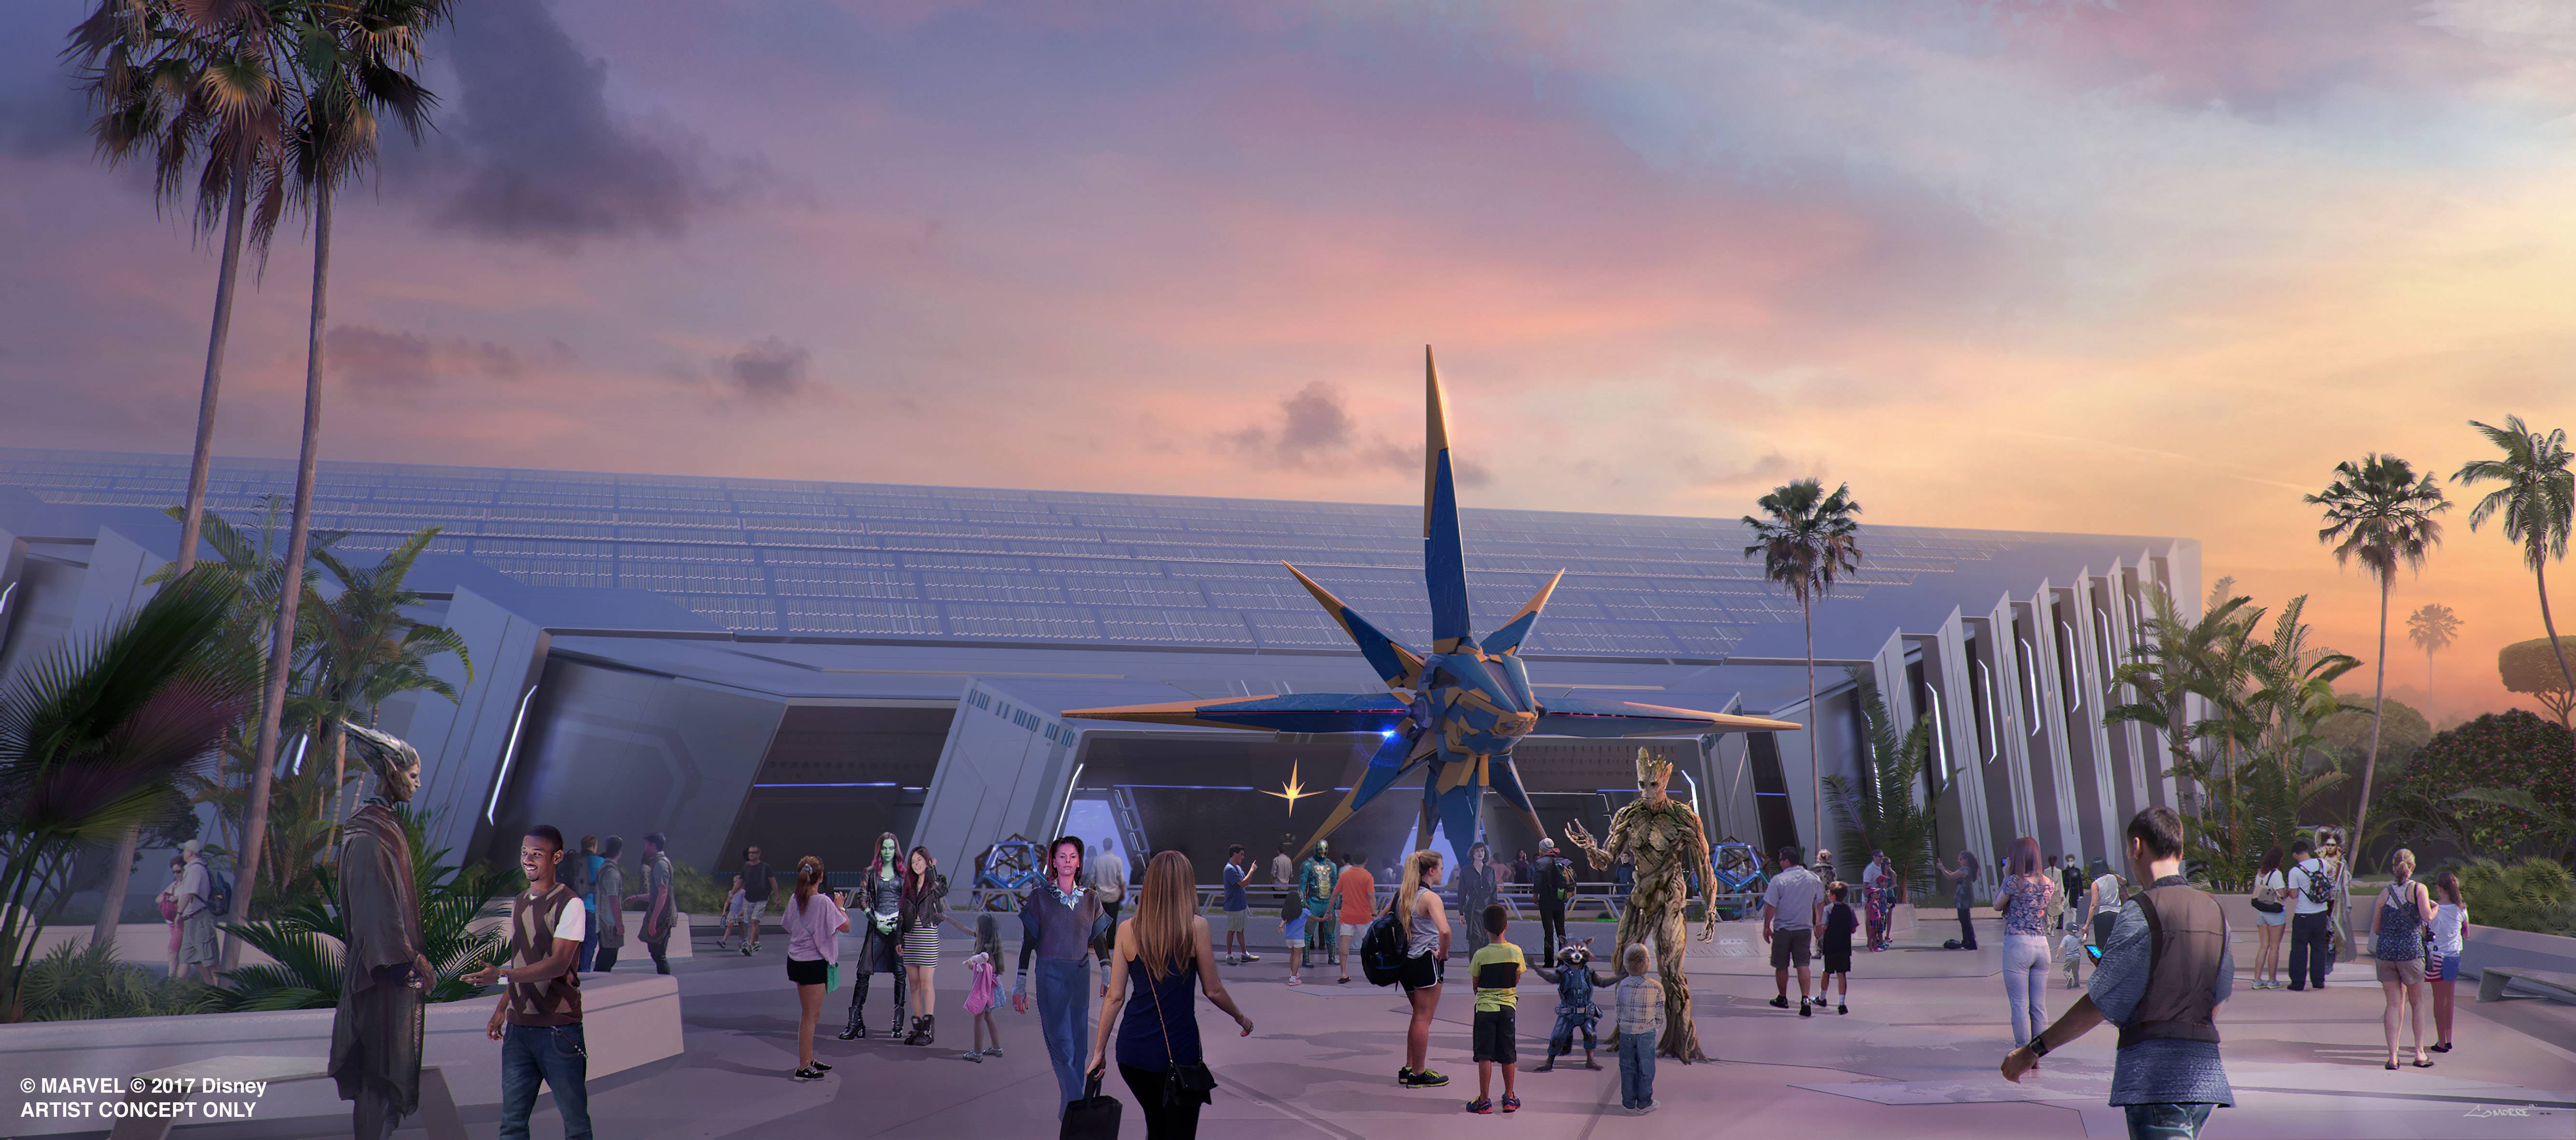 Guardians of the Galaxy attraction opening in Epcot's Future World